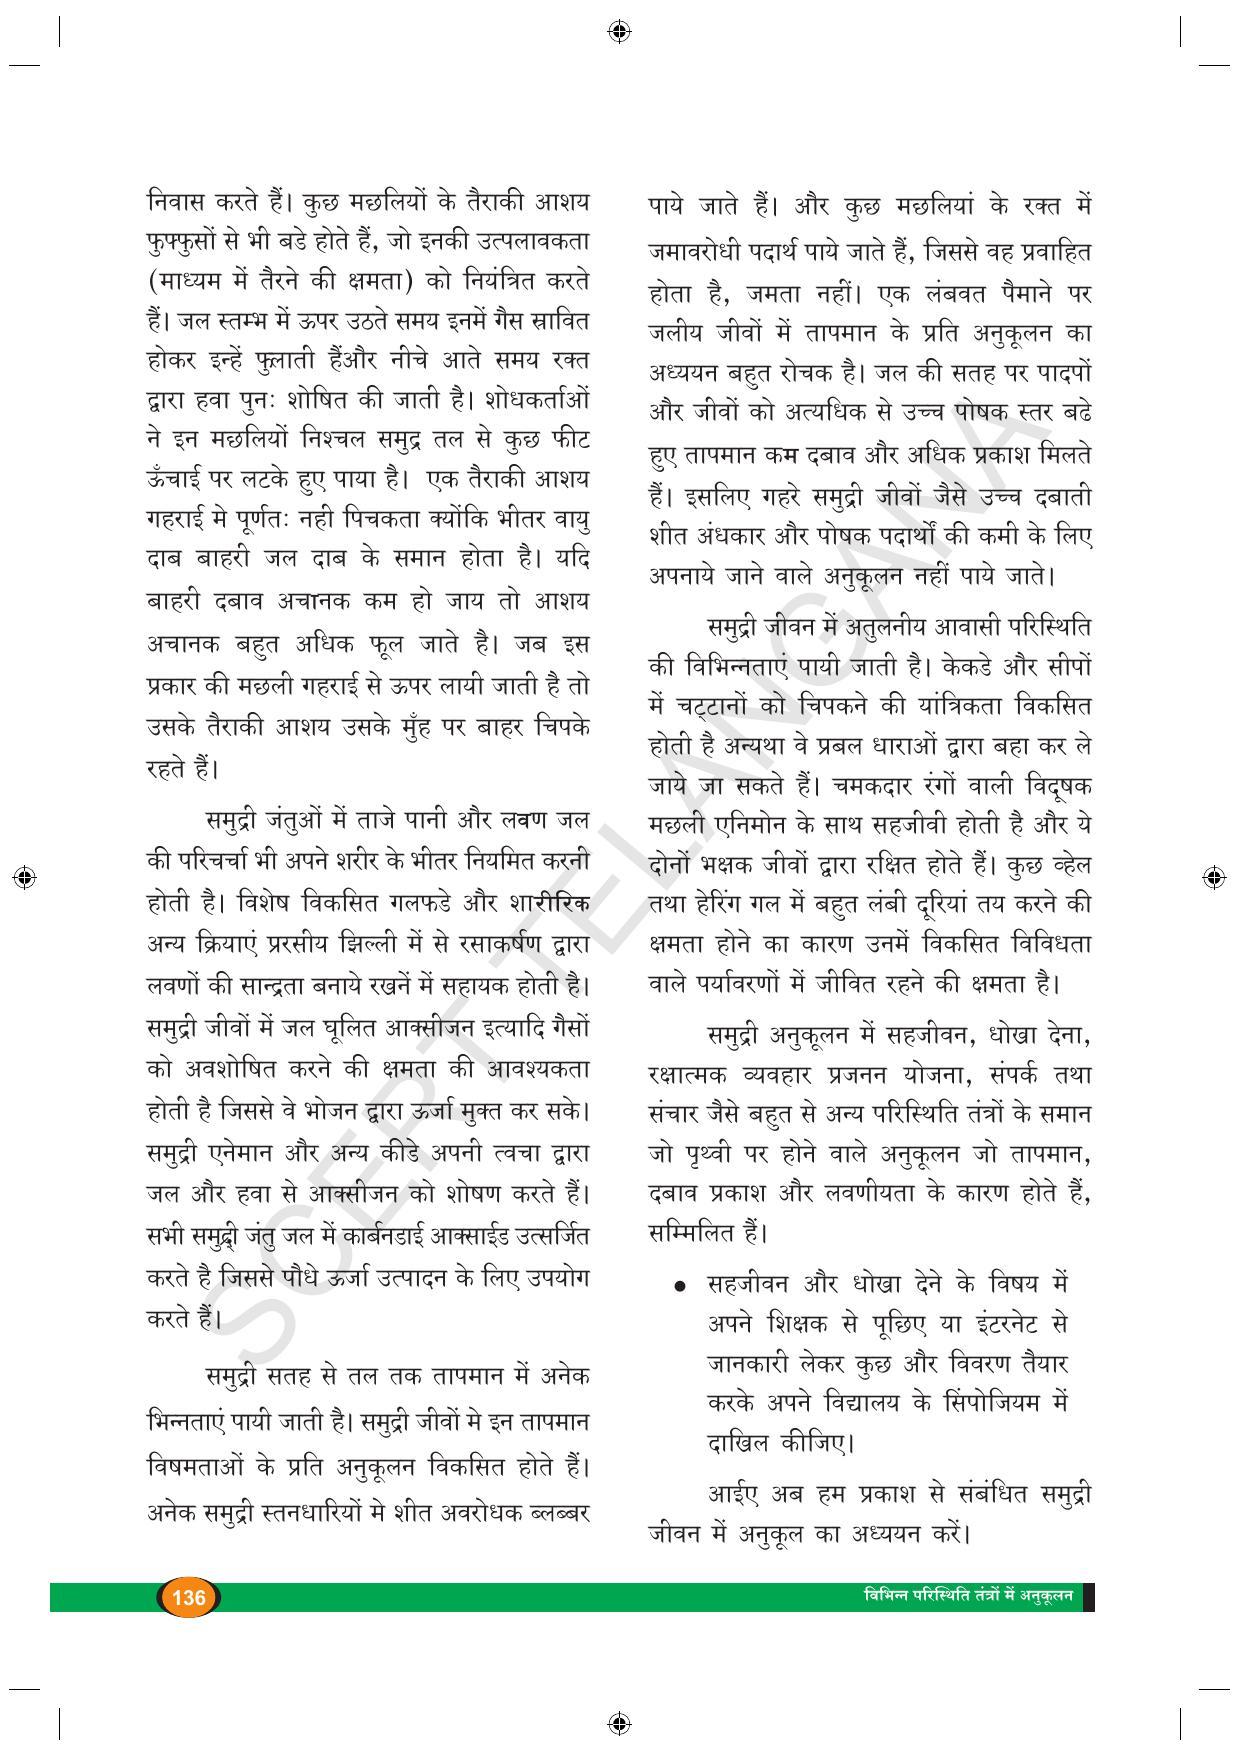 TS SCERT Class 9 Biological Science (Hindi Medium) Text Book - Page 148